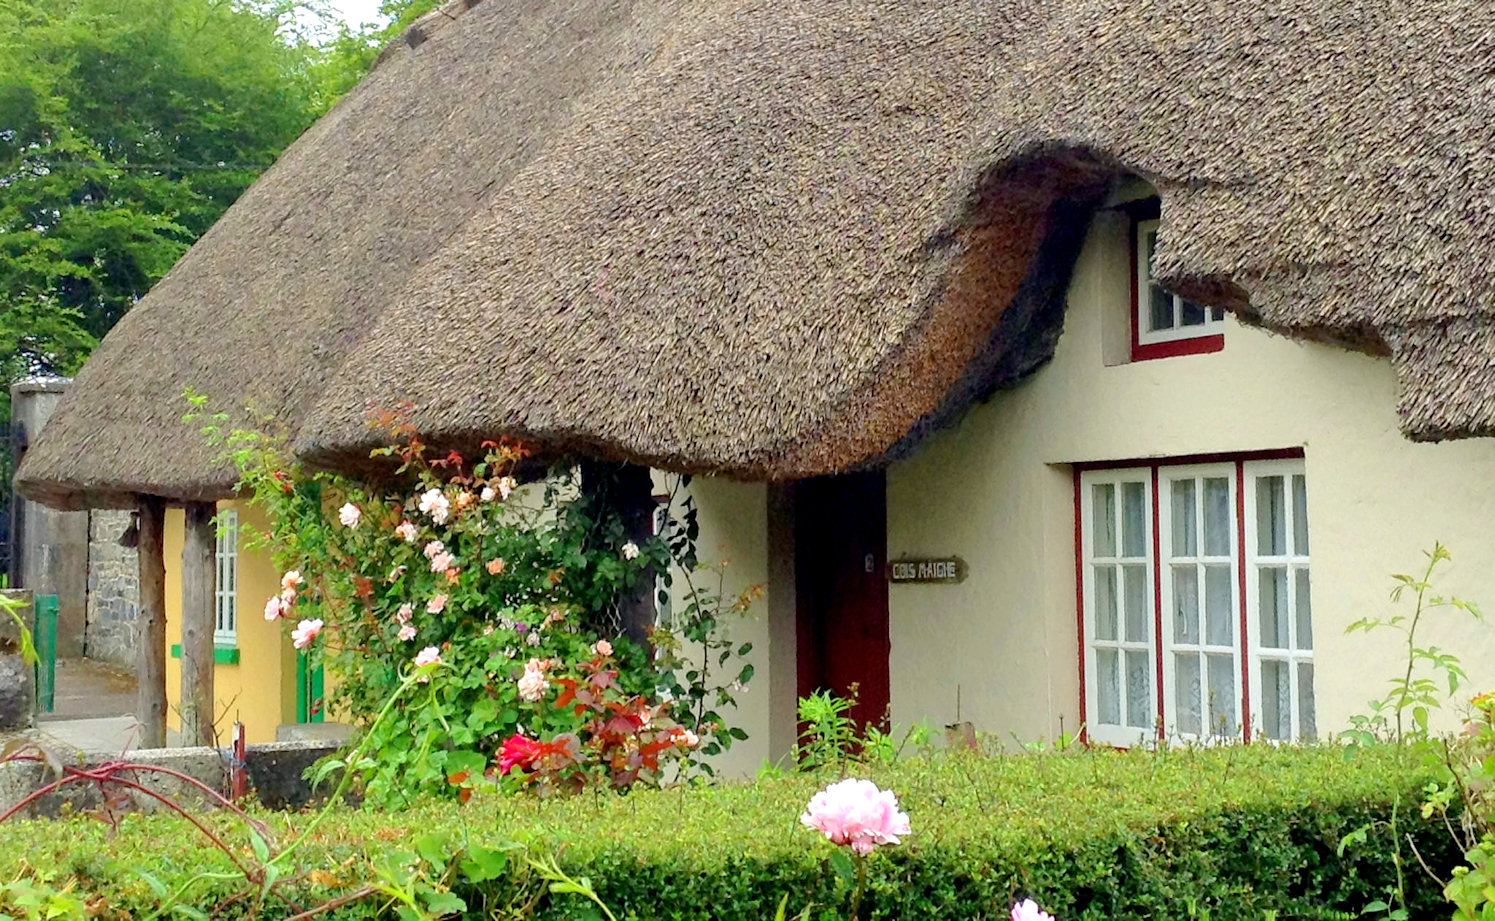 Thatched Roof Jigsaw Puzzle